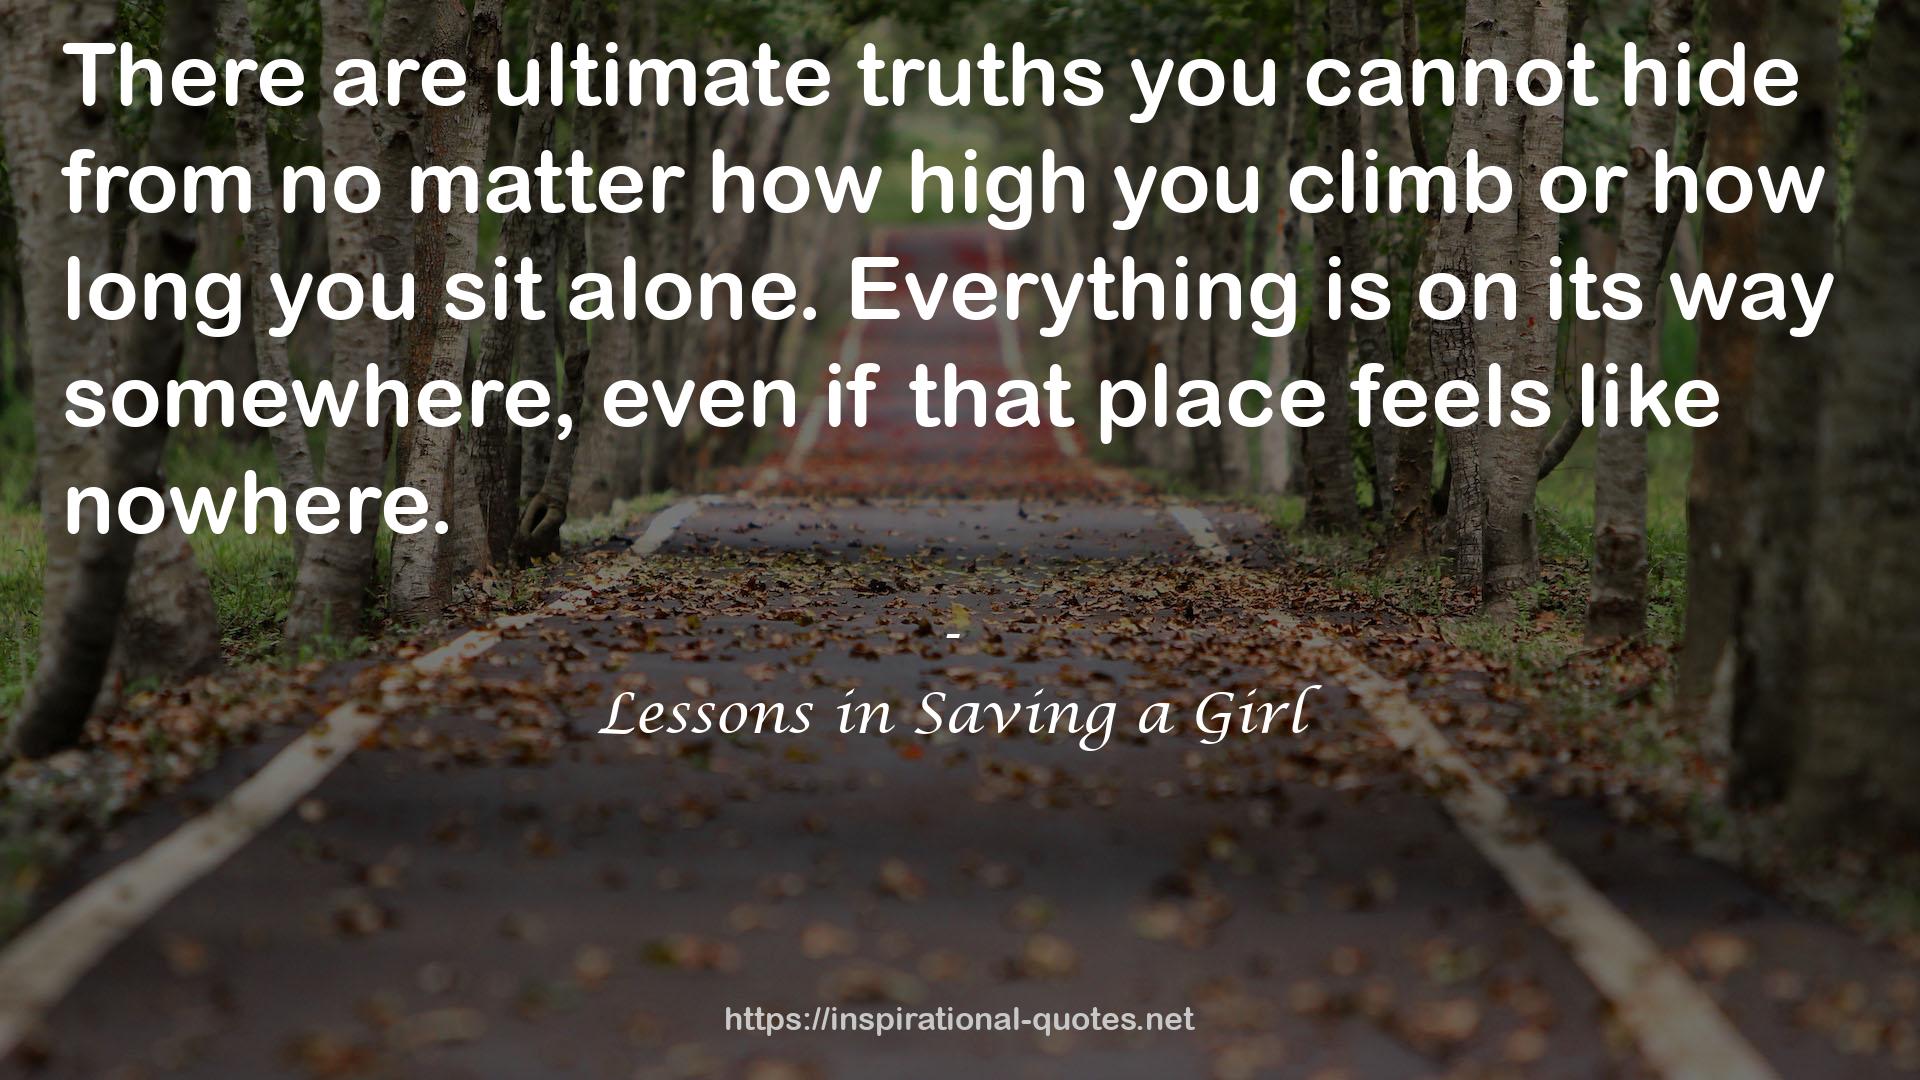 Lessons in Saving a Girl QUOTES